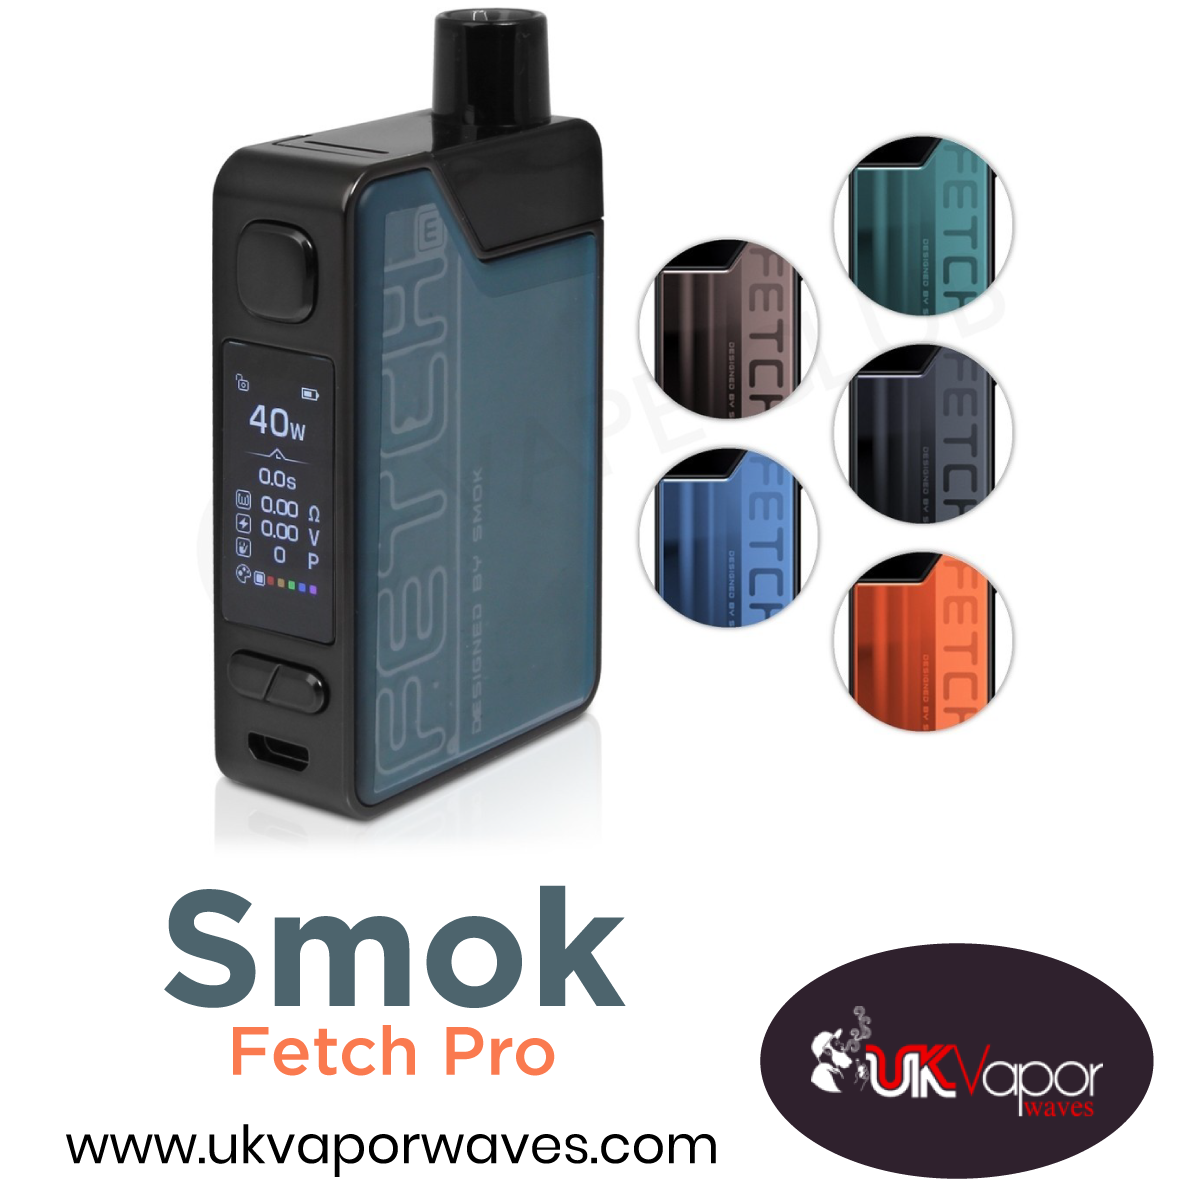 Get Your Smok Fetch Pro and Kit for Affordable Prices in UK